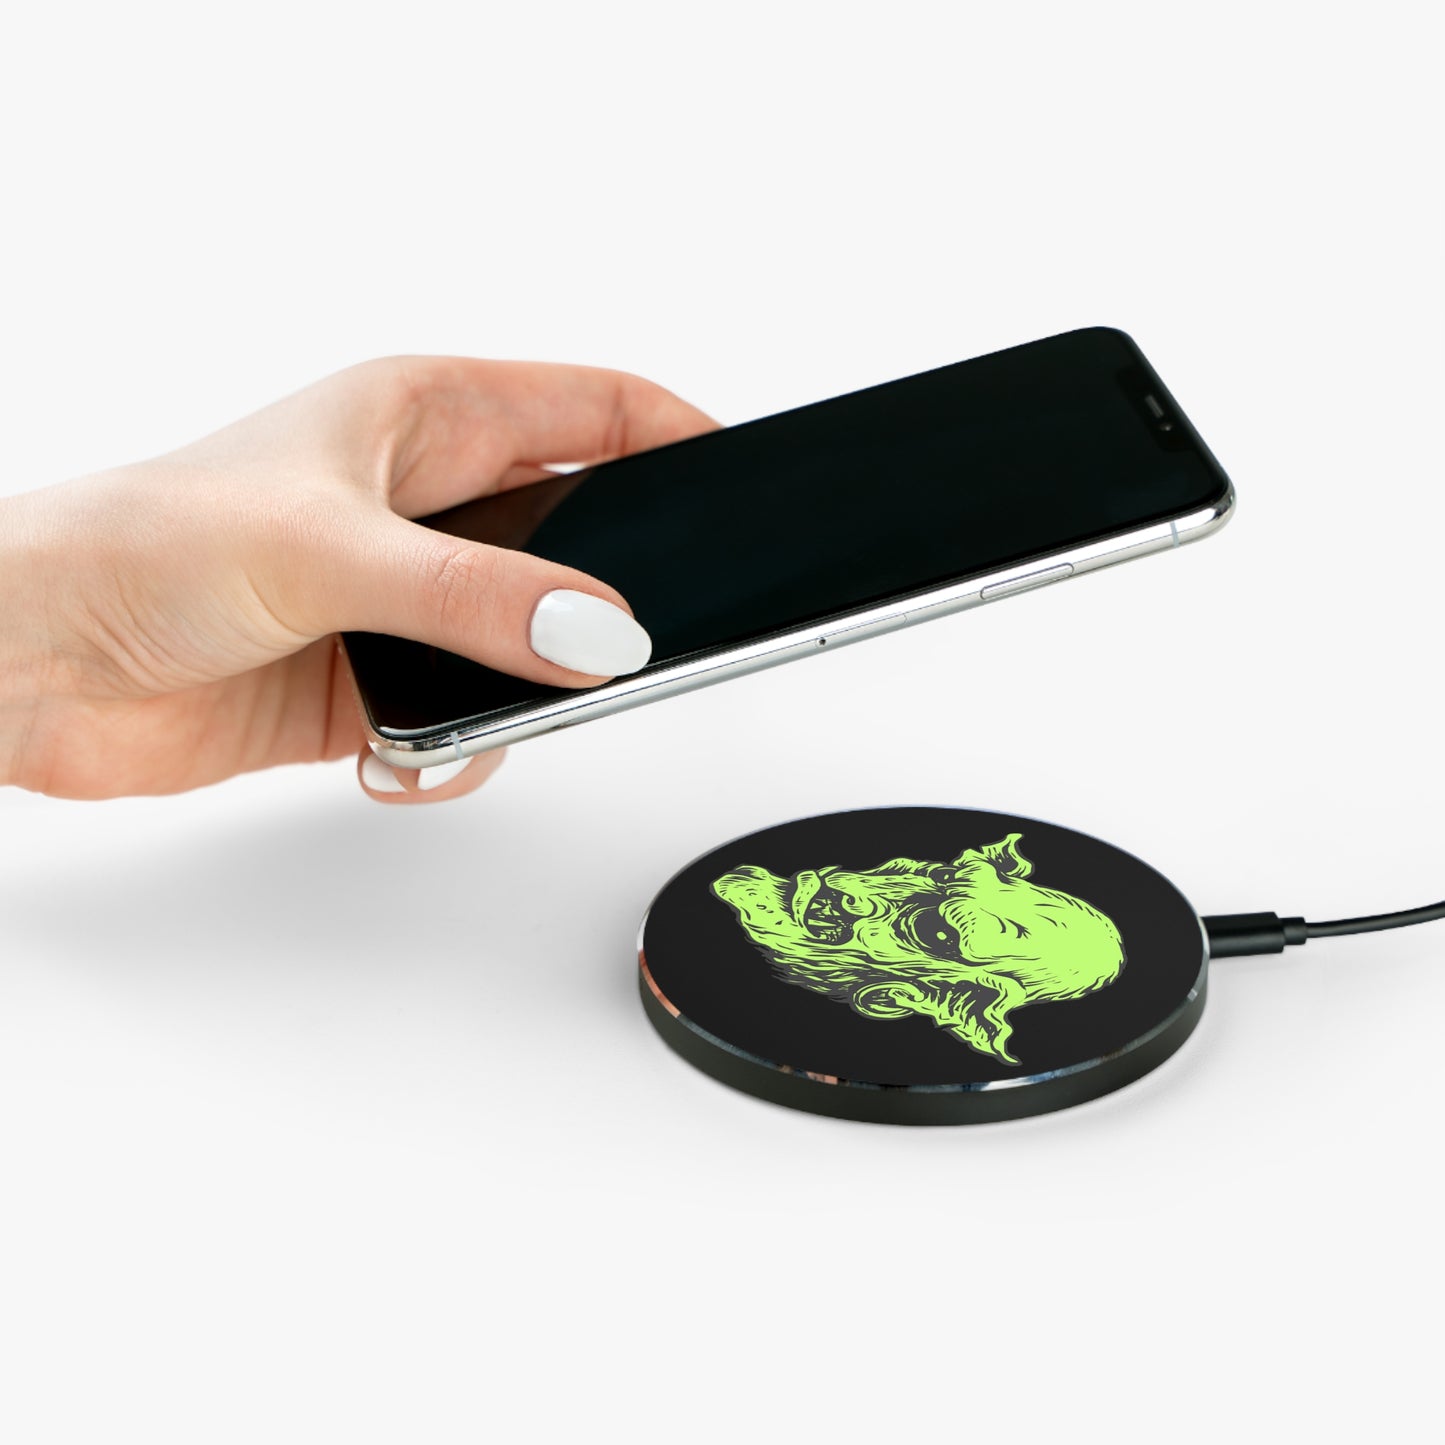 Wireless Charger - Goblin Charger Includes Micro USB Cable